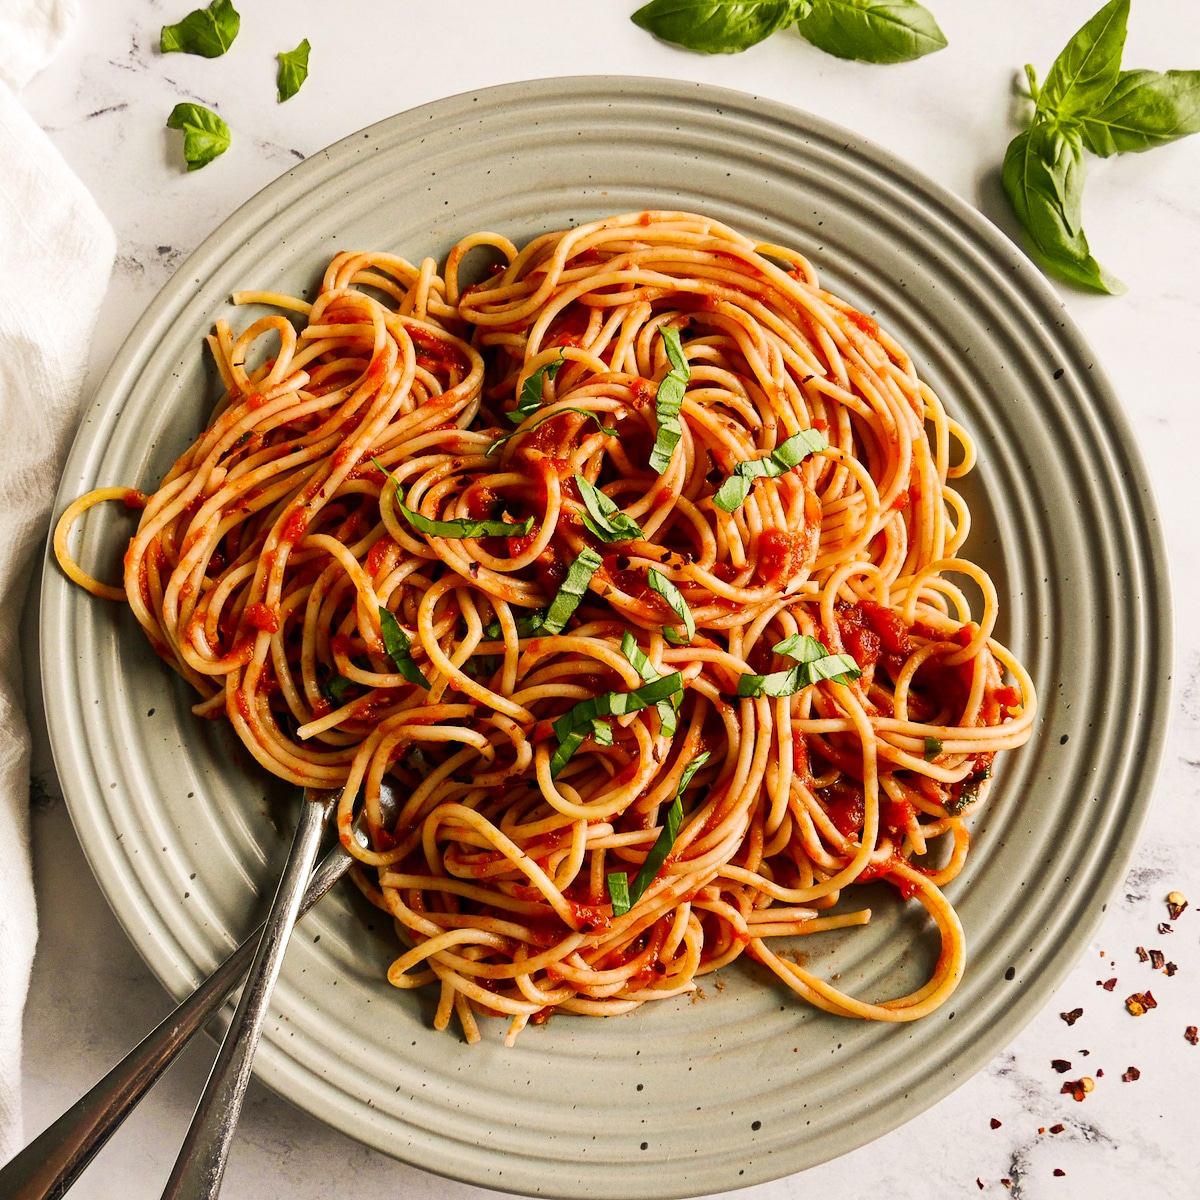 Spaghetti noodles tossed with tomato sauce and arranged on a plate.